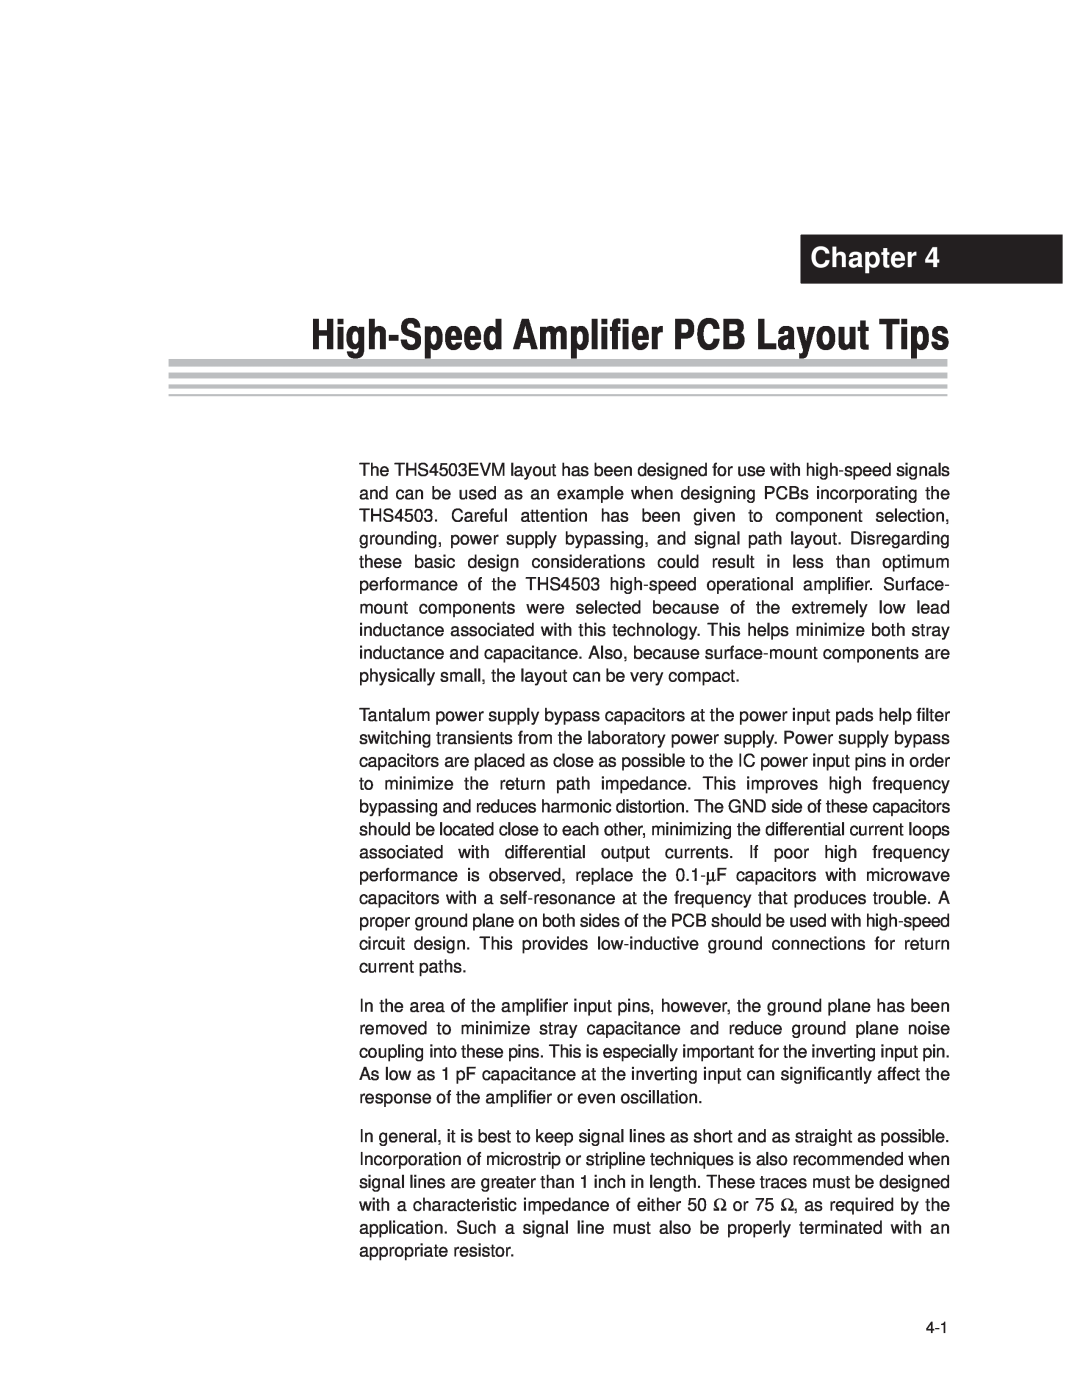 Texas Instruments THS4503EVM manual Chapter, High-SpeedAmplifier PCB Layout Tips 